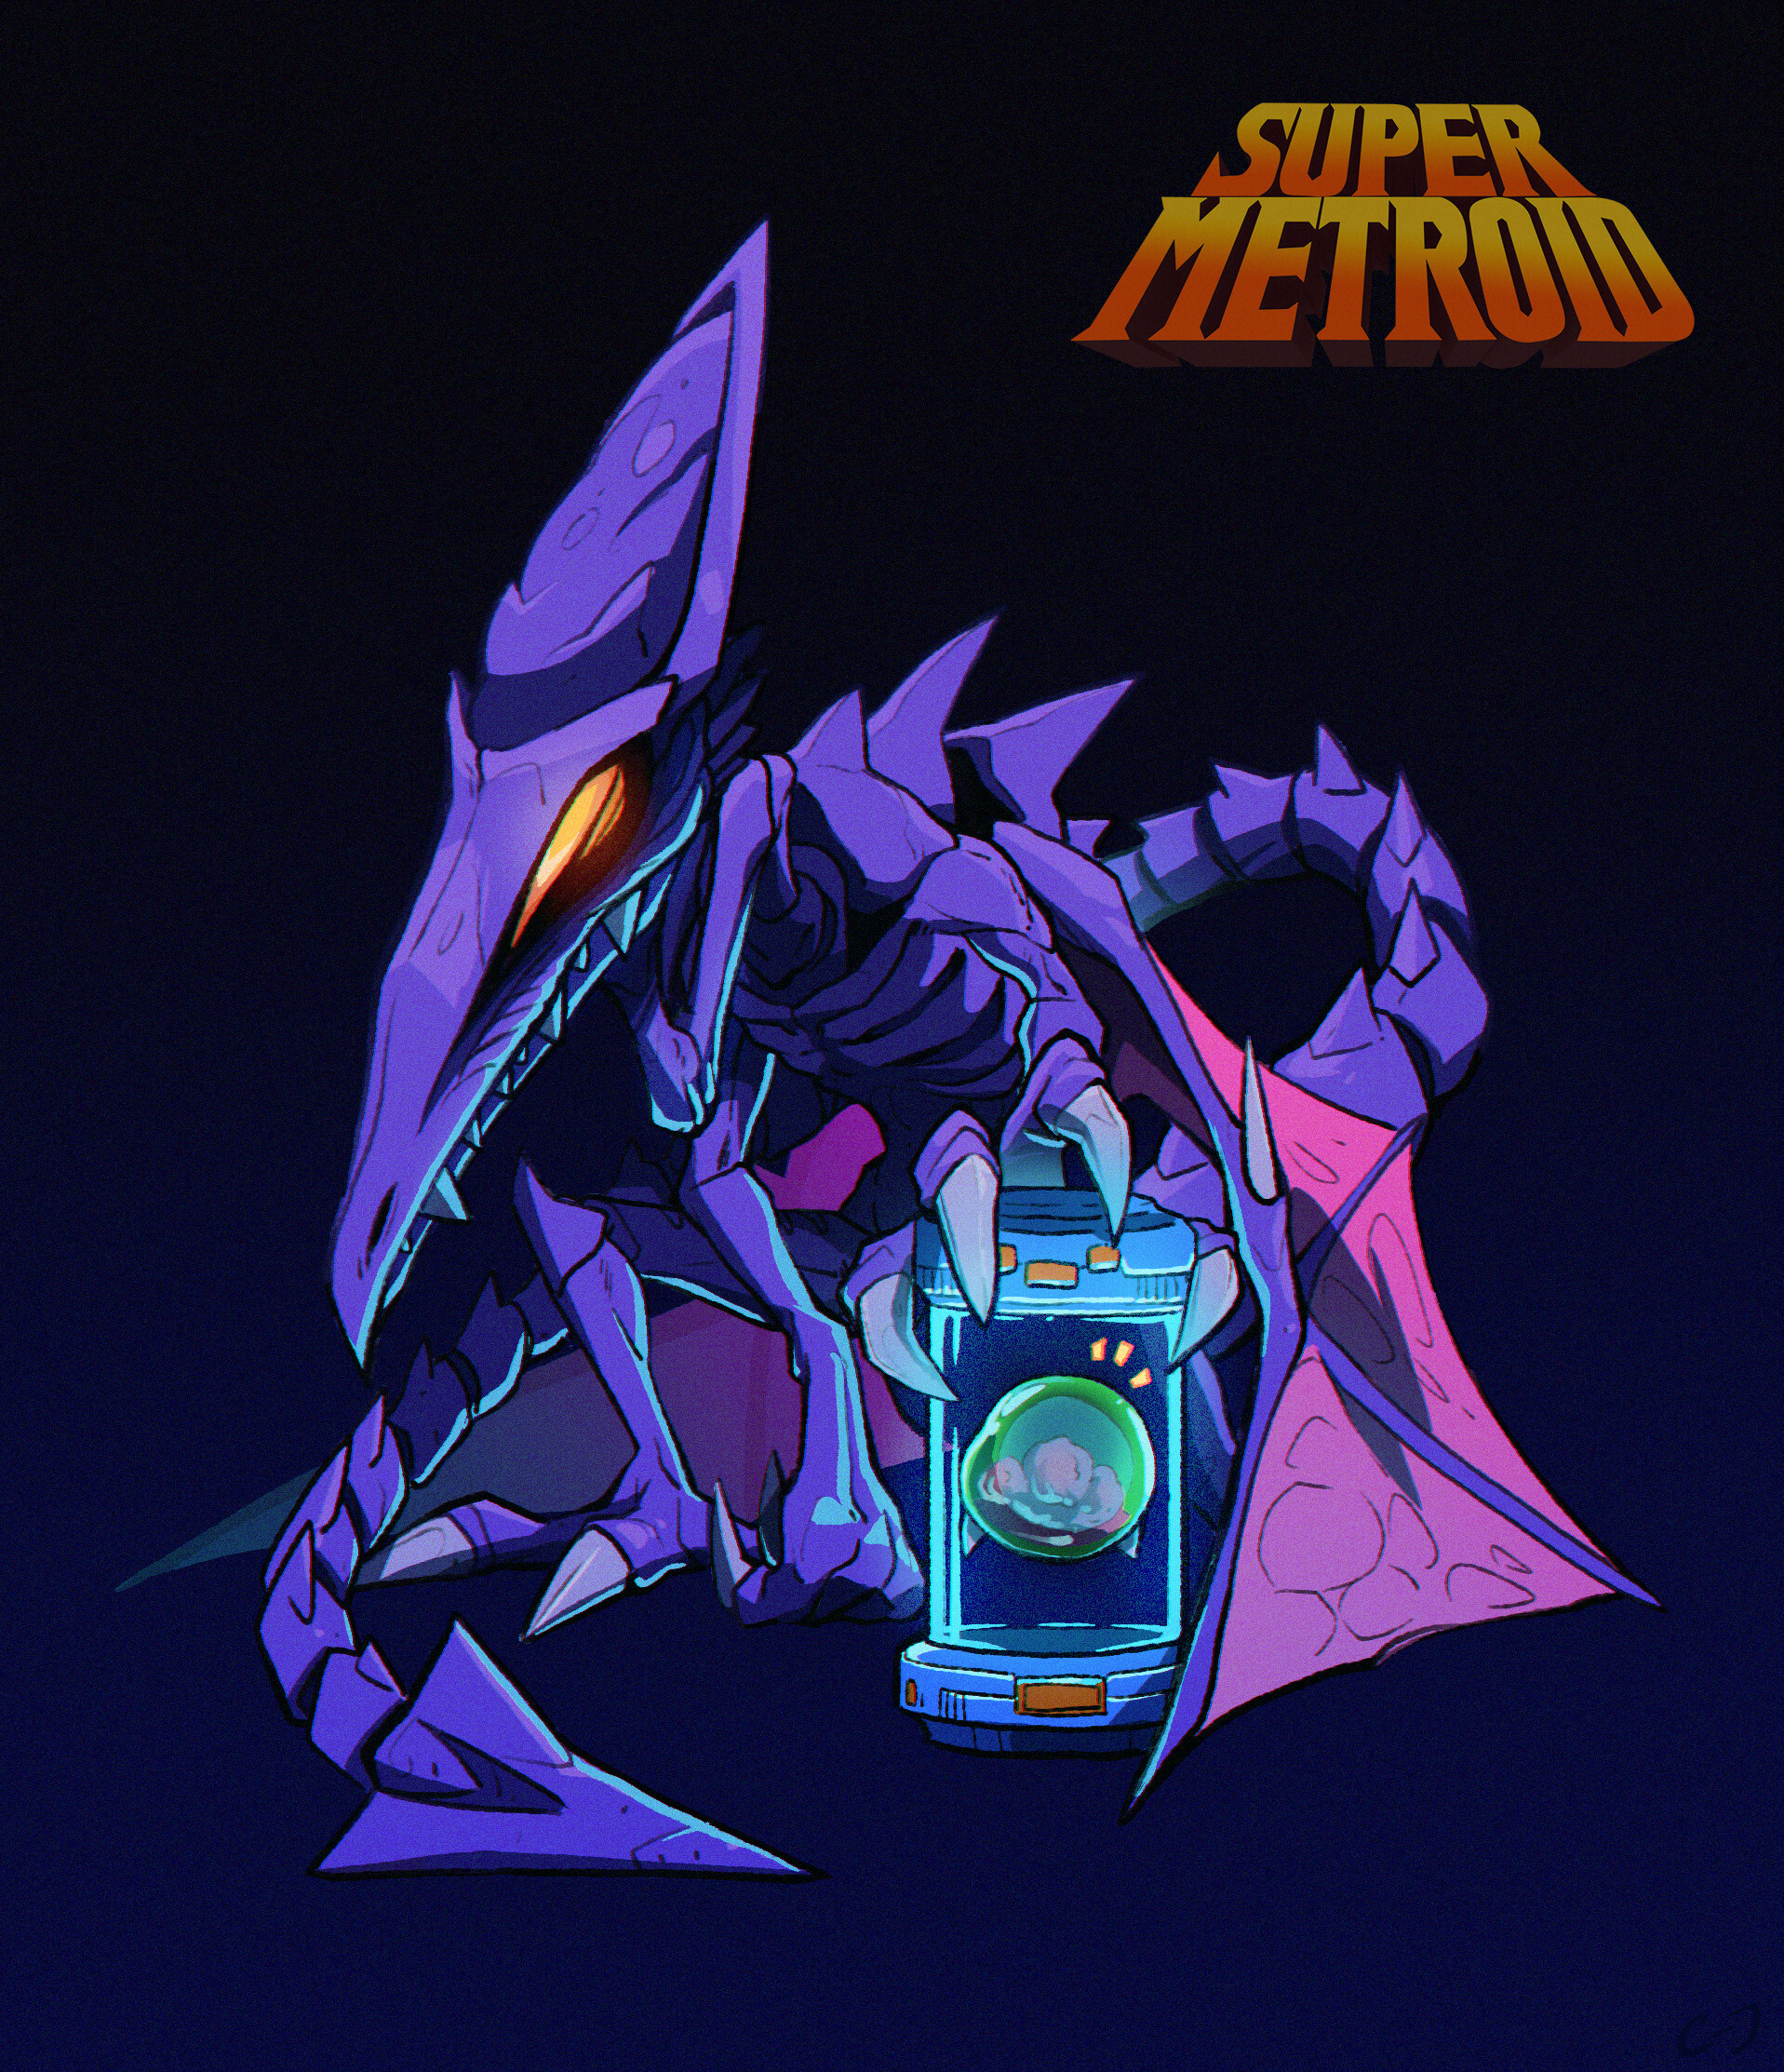 Super Metroid live wallpaperAmazoncomAppstore for Android